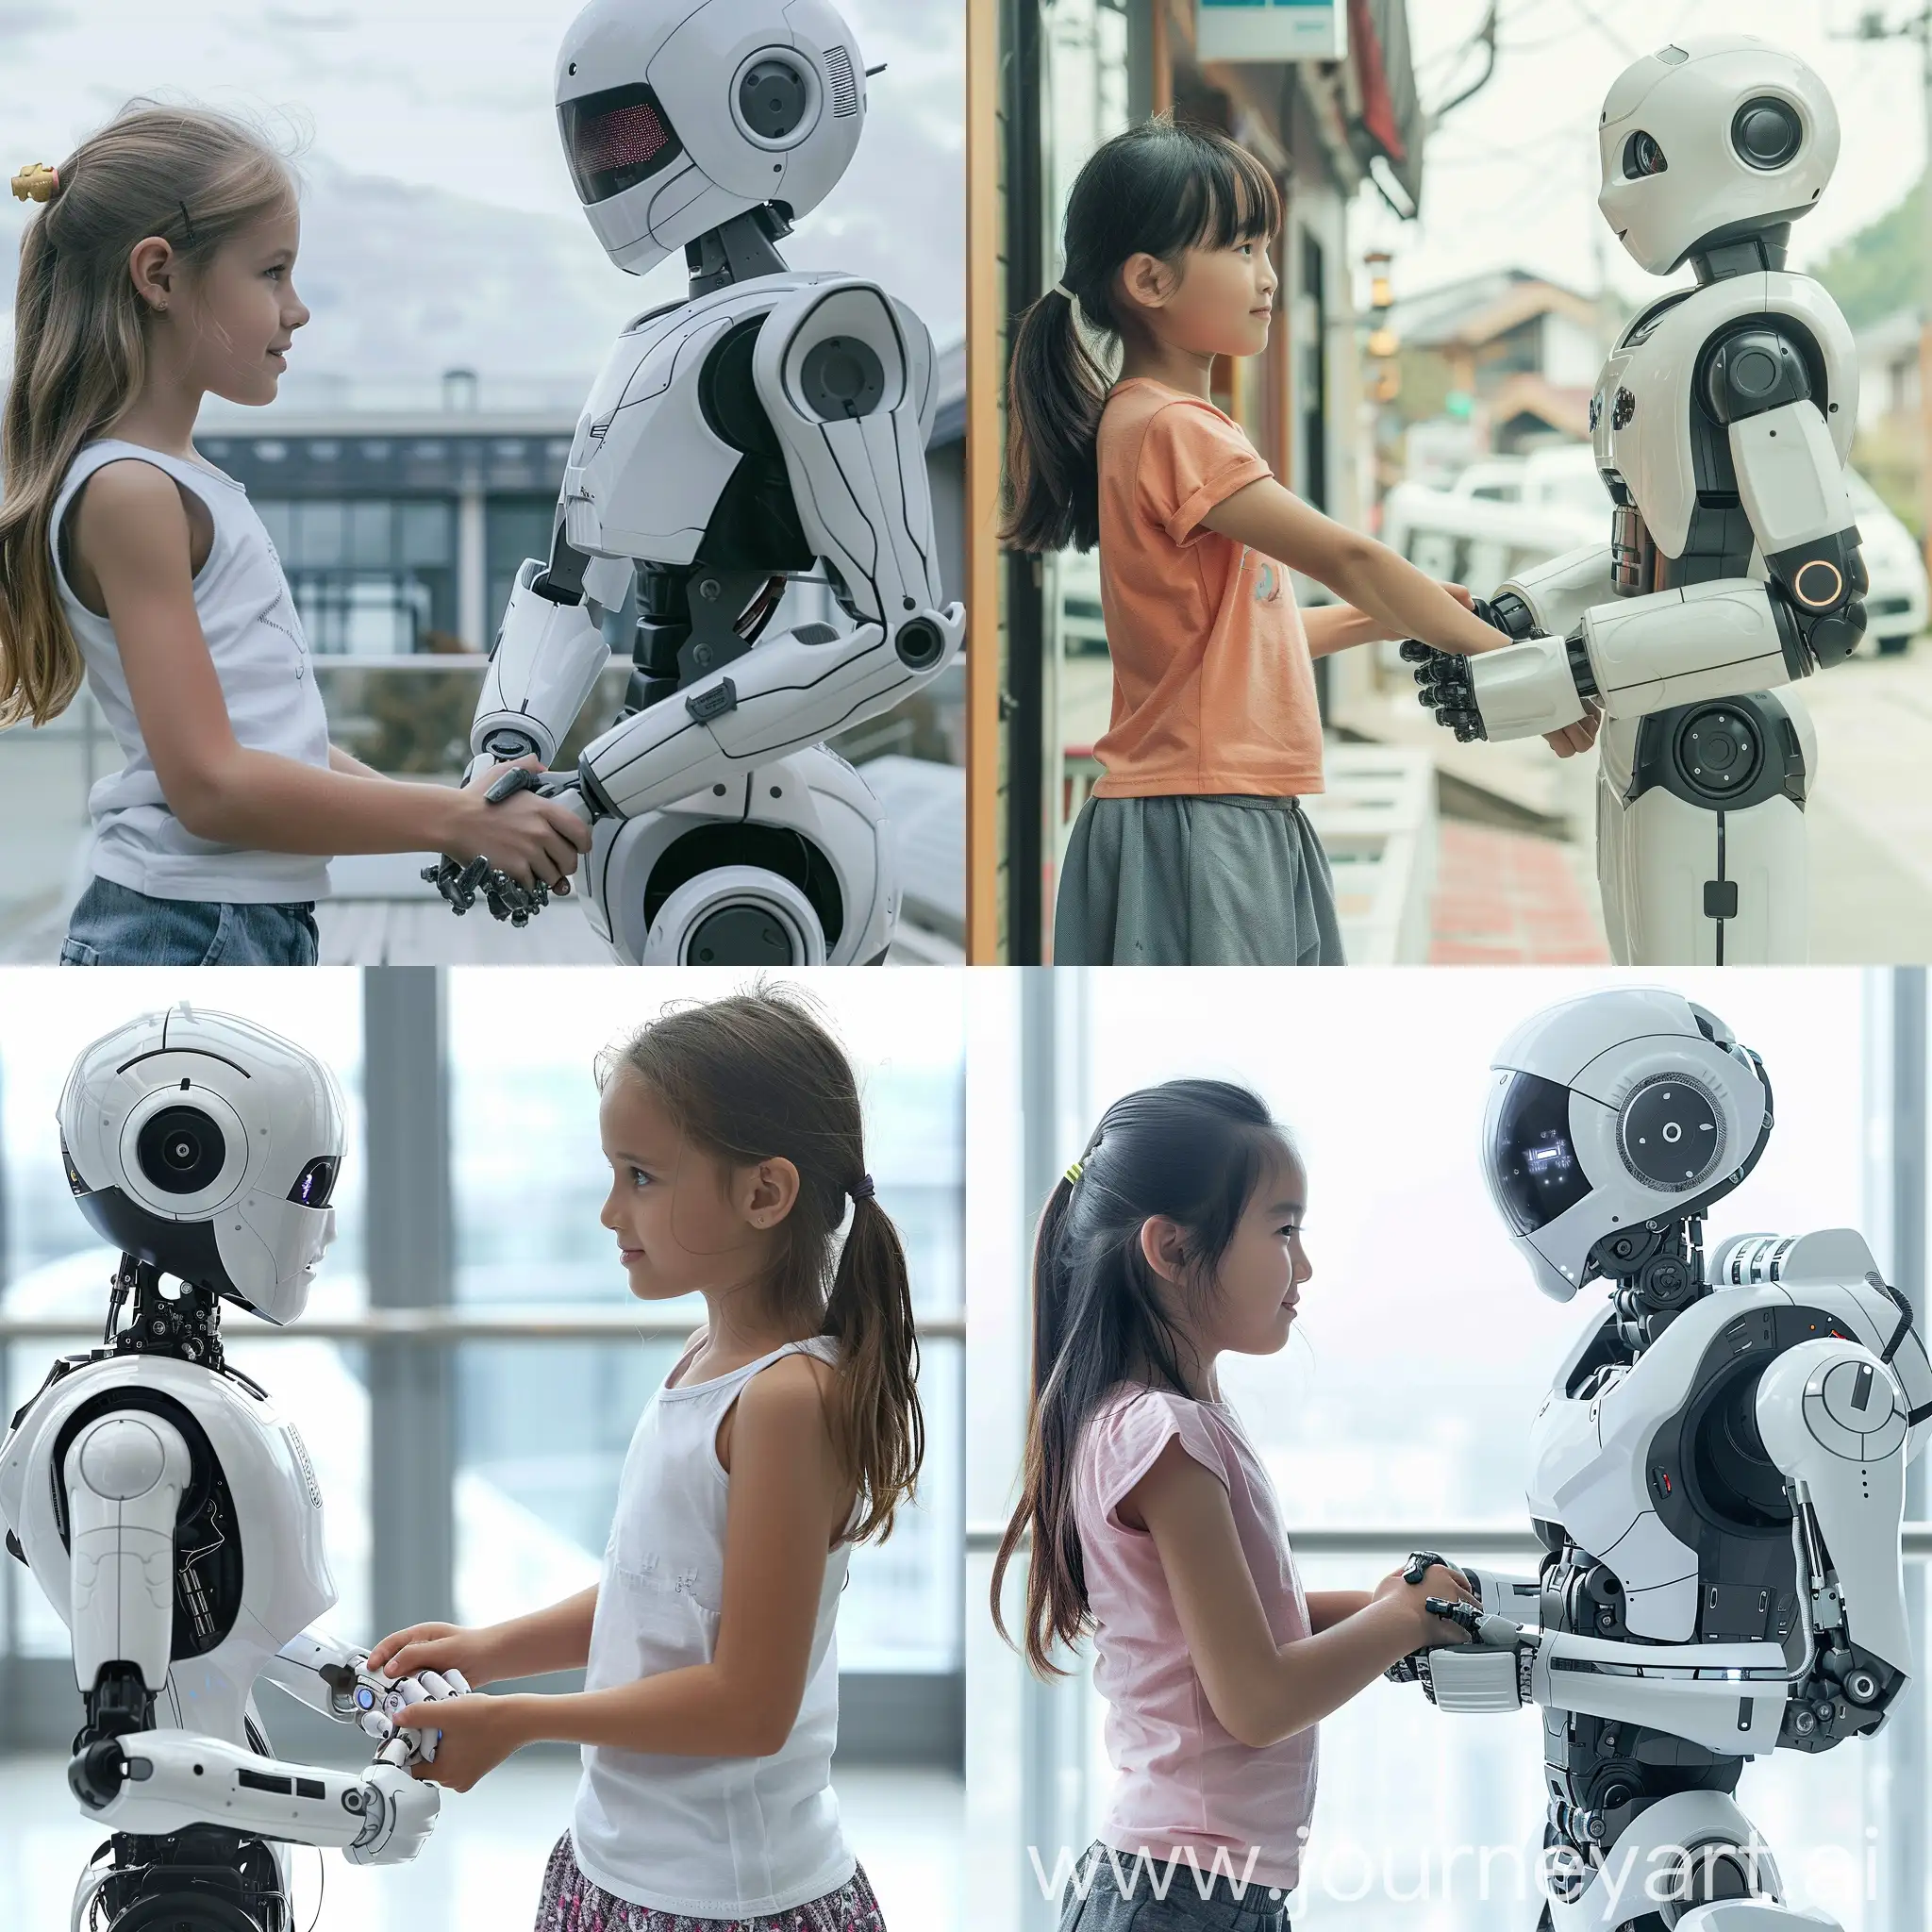 Girl-Shaking-Hands-with-Robot-Futuristic-Interaction-and-Technology-Concept